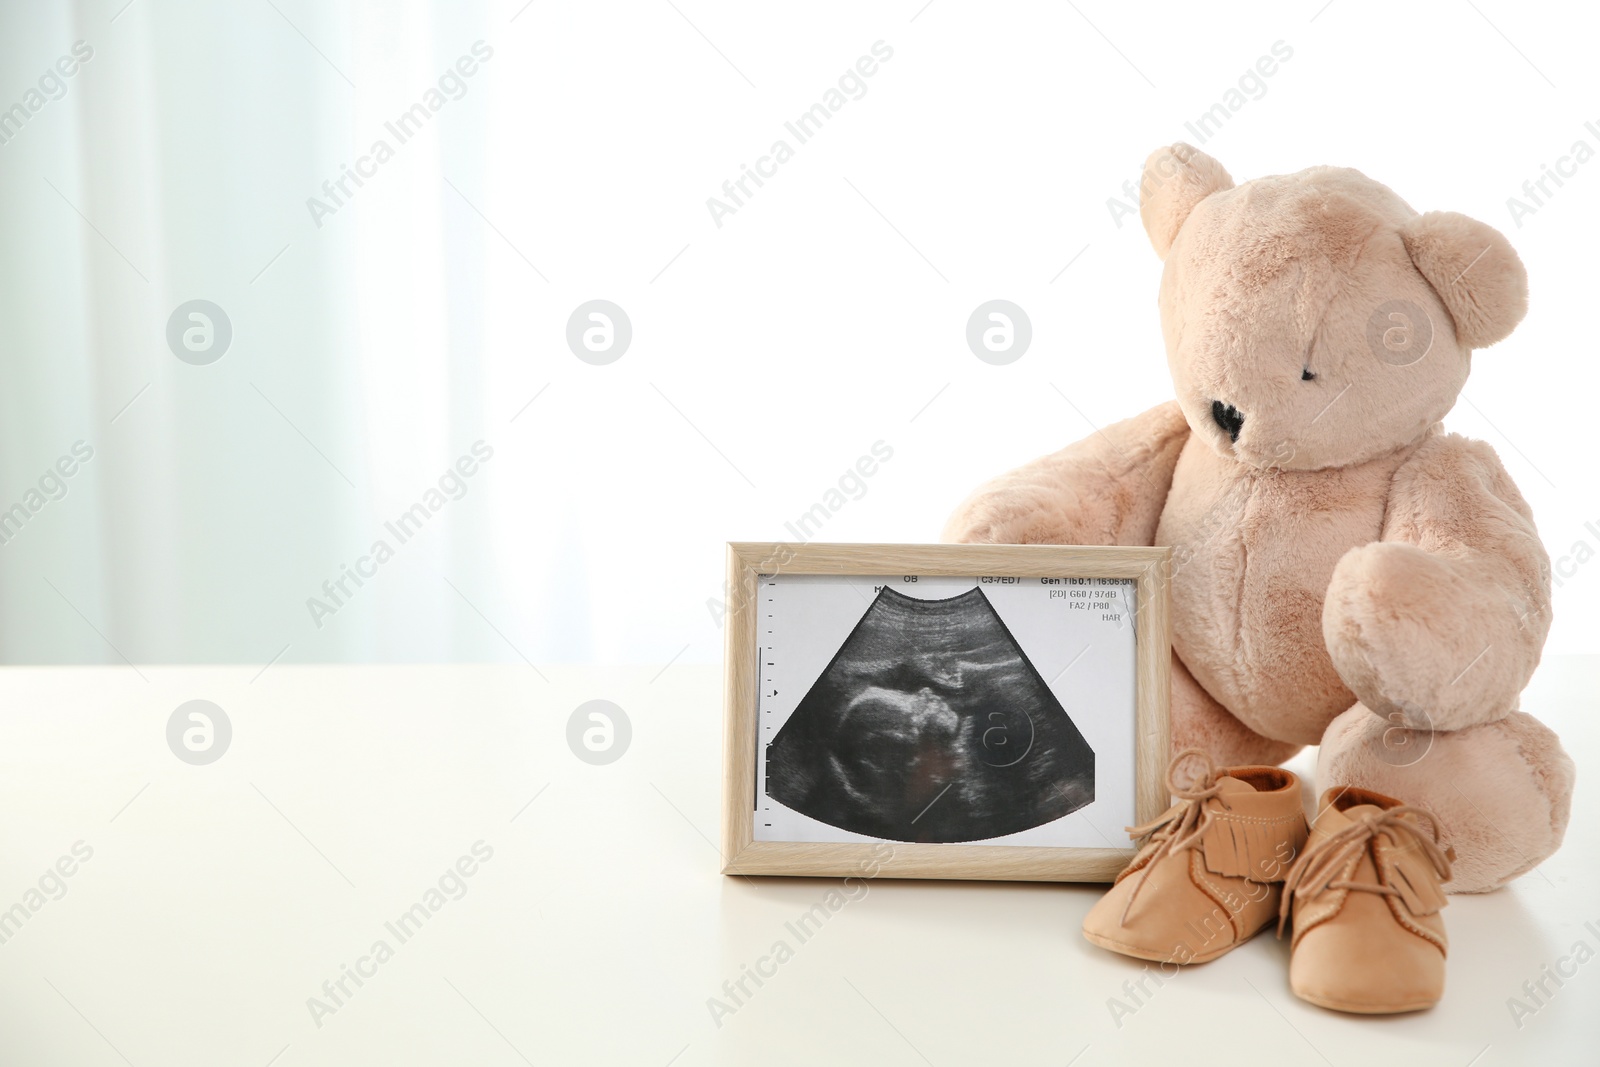 Photo of Ultrasound picture, teddy bear and baby shoes on table against light background. Space for text